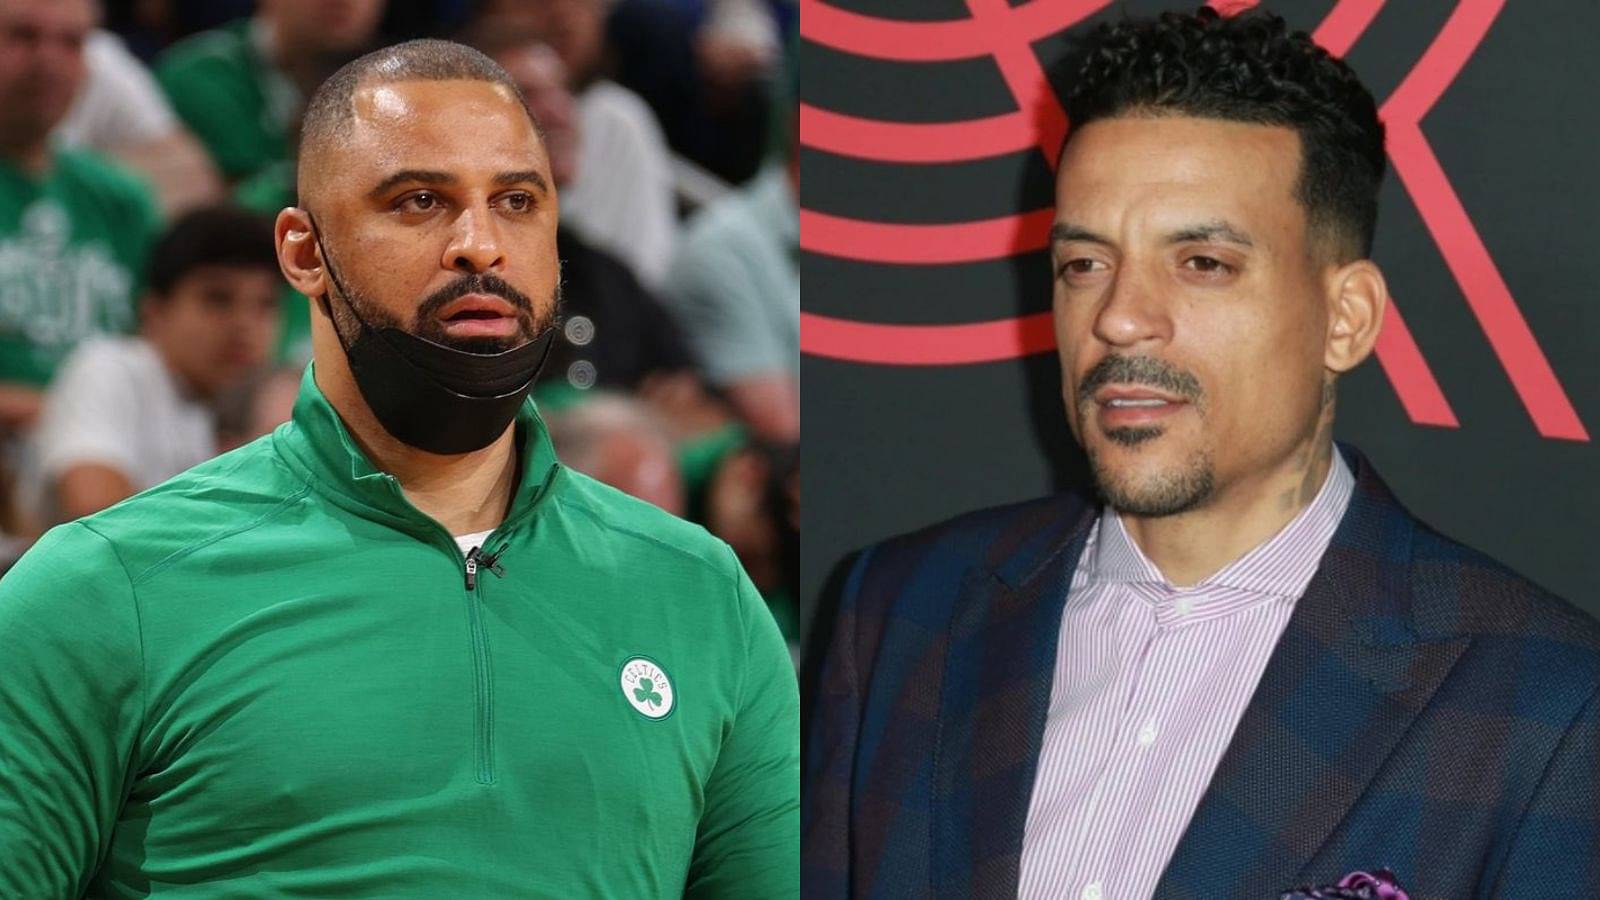 Matt Barnes Reversed His Stance on Ime Udoka After “Finding Out Who He Slept With”